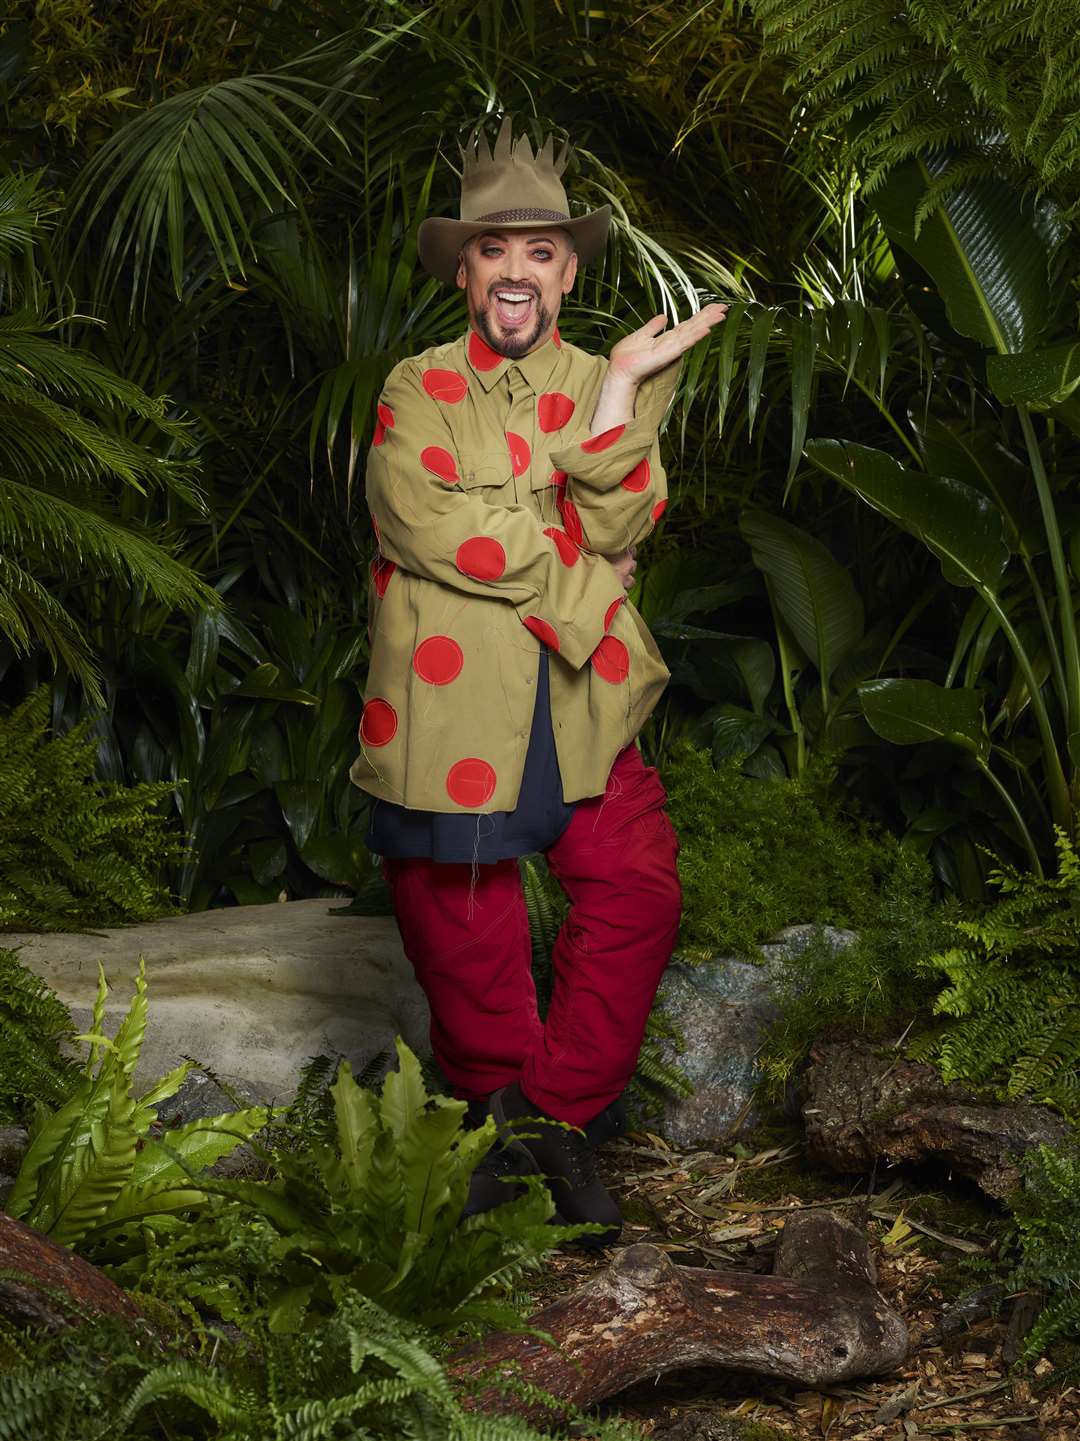 Wednesday’s episode saw Boy George voice his growing frustrations with his campmates (ITV/PA)